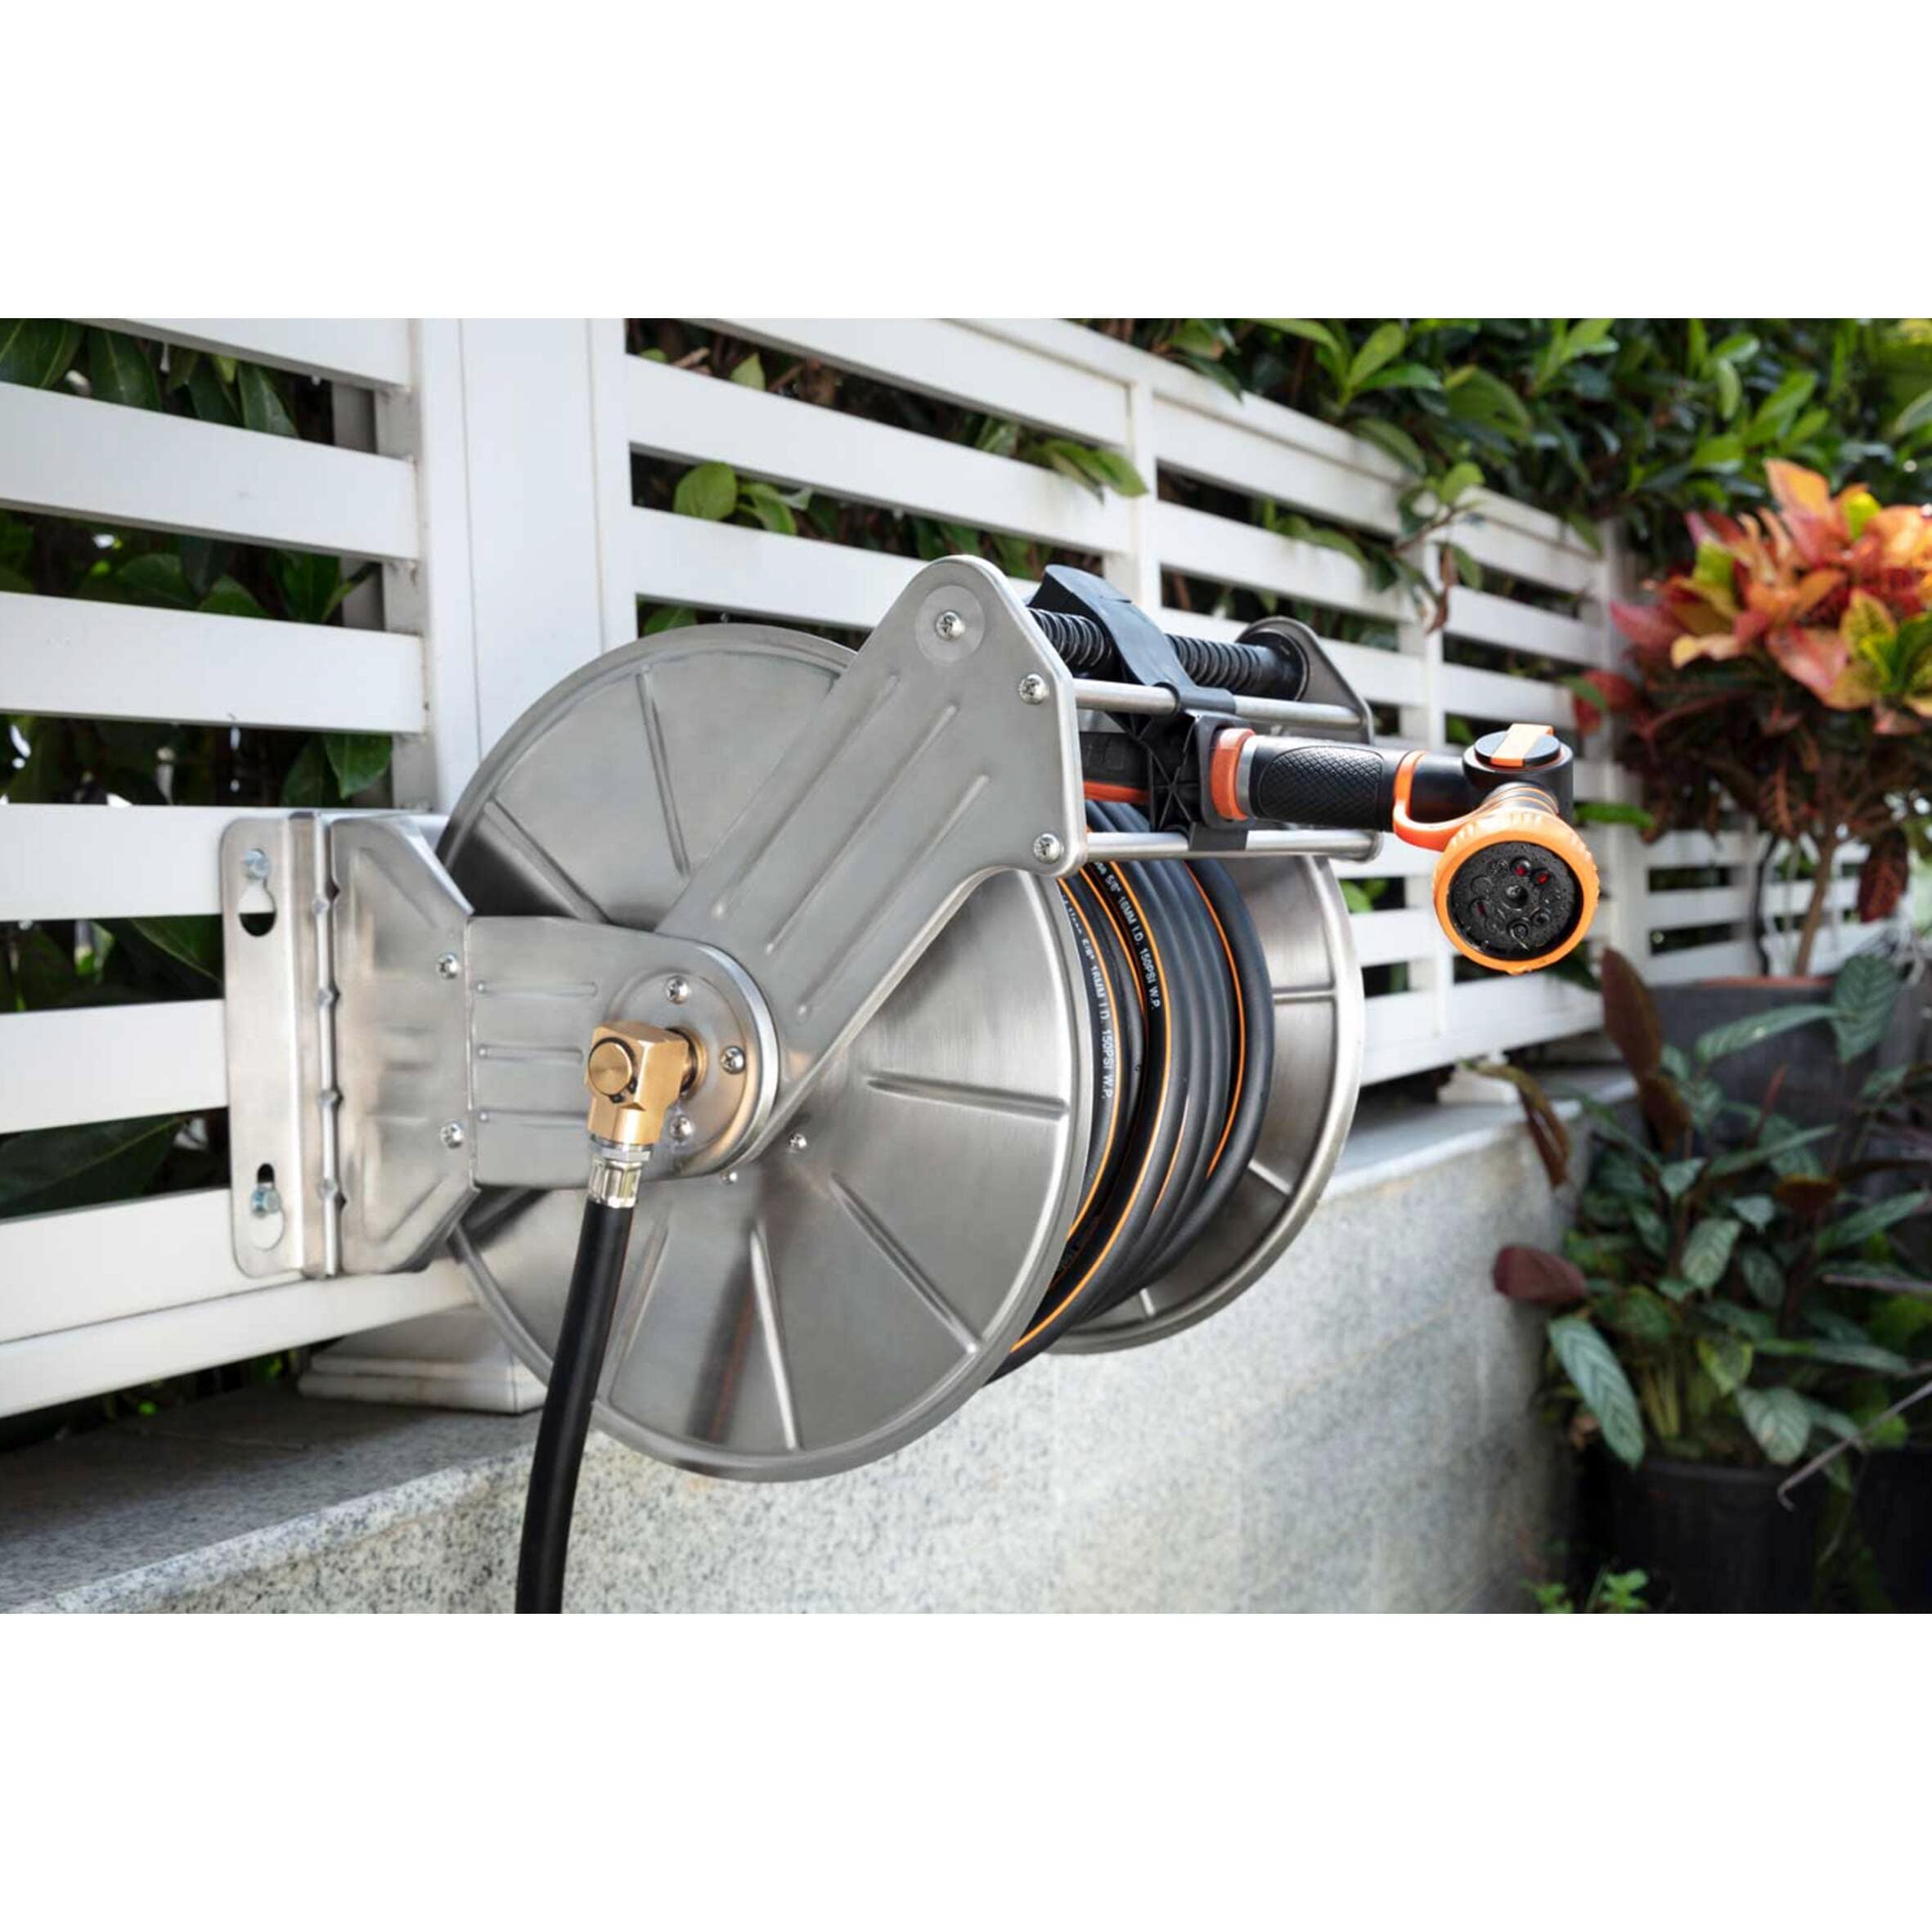 Garden Wall Mounted Retractable Hose Reel Cover, for Giraffe tools and More  